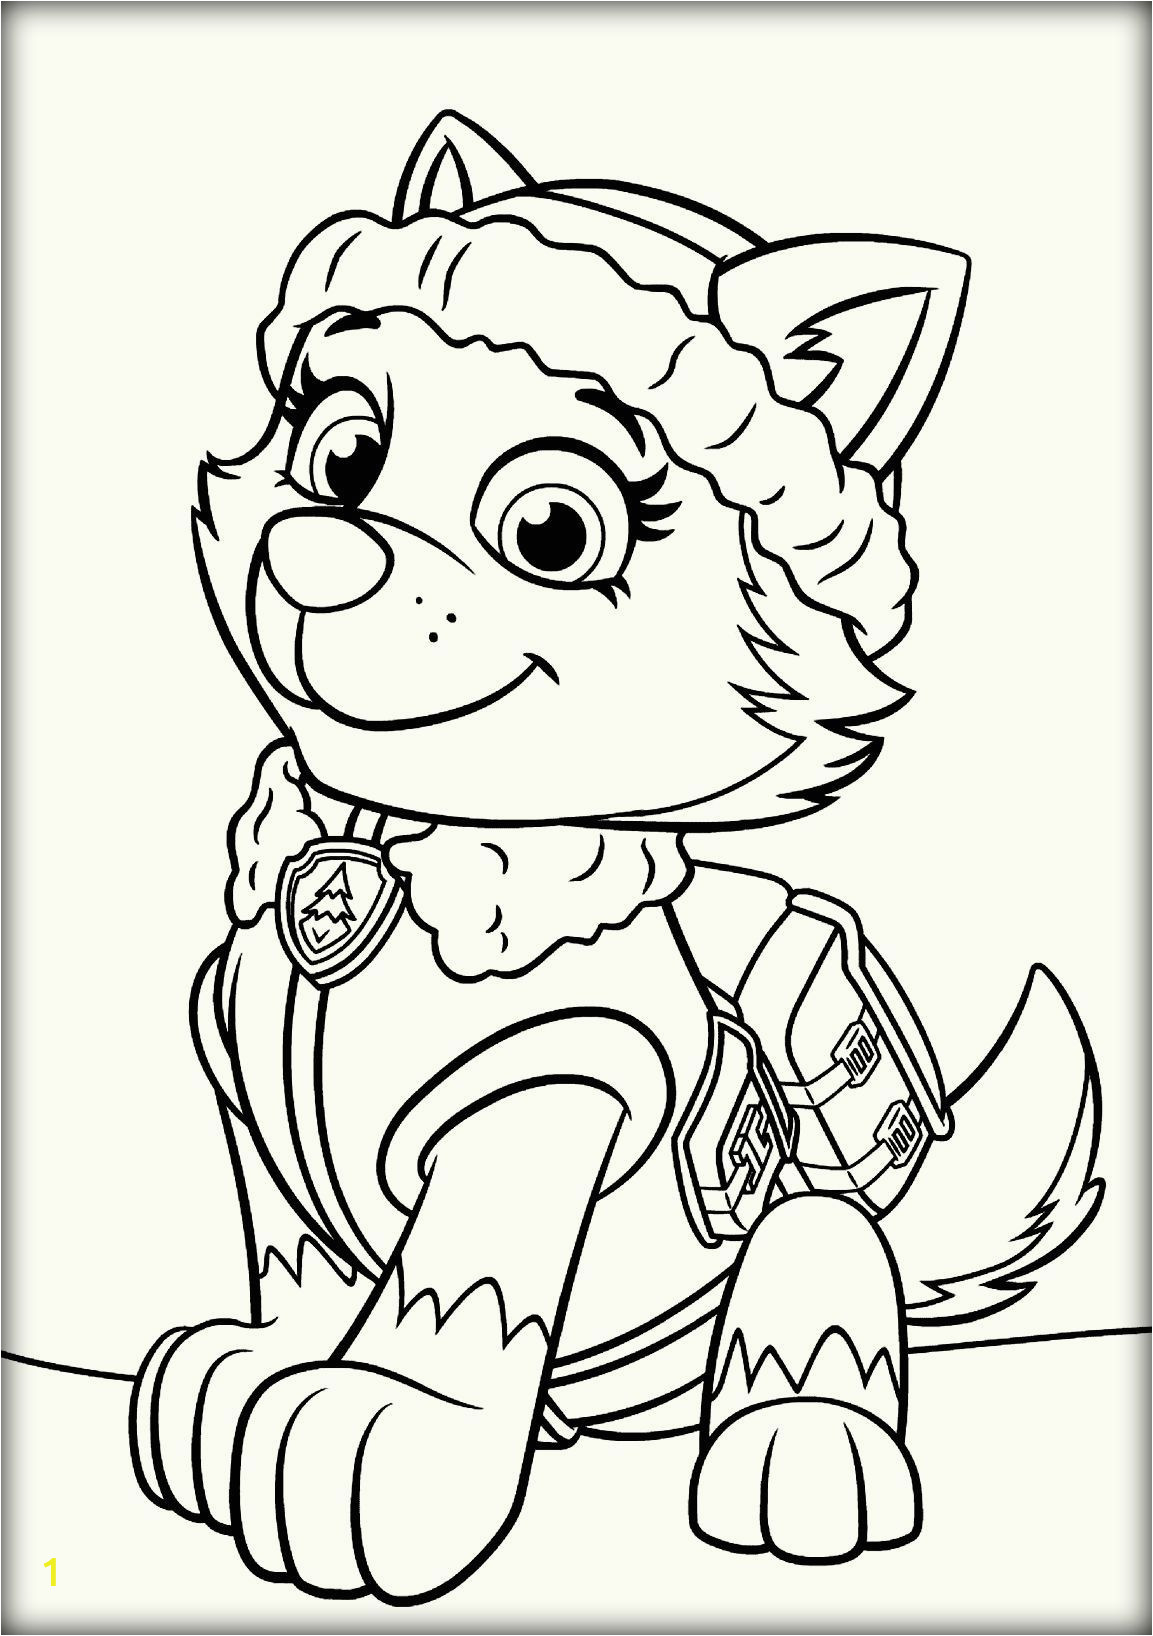 Coloring Pages Paw Patrol Printable Paw Patrol Everest Coloring Pages with Images